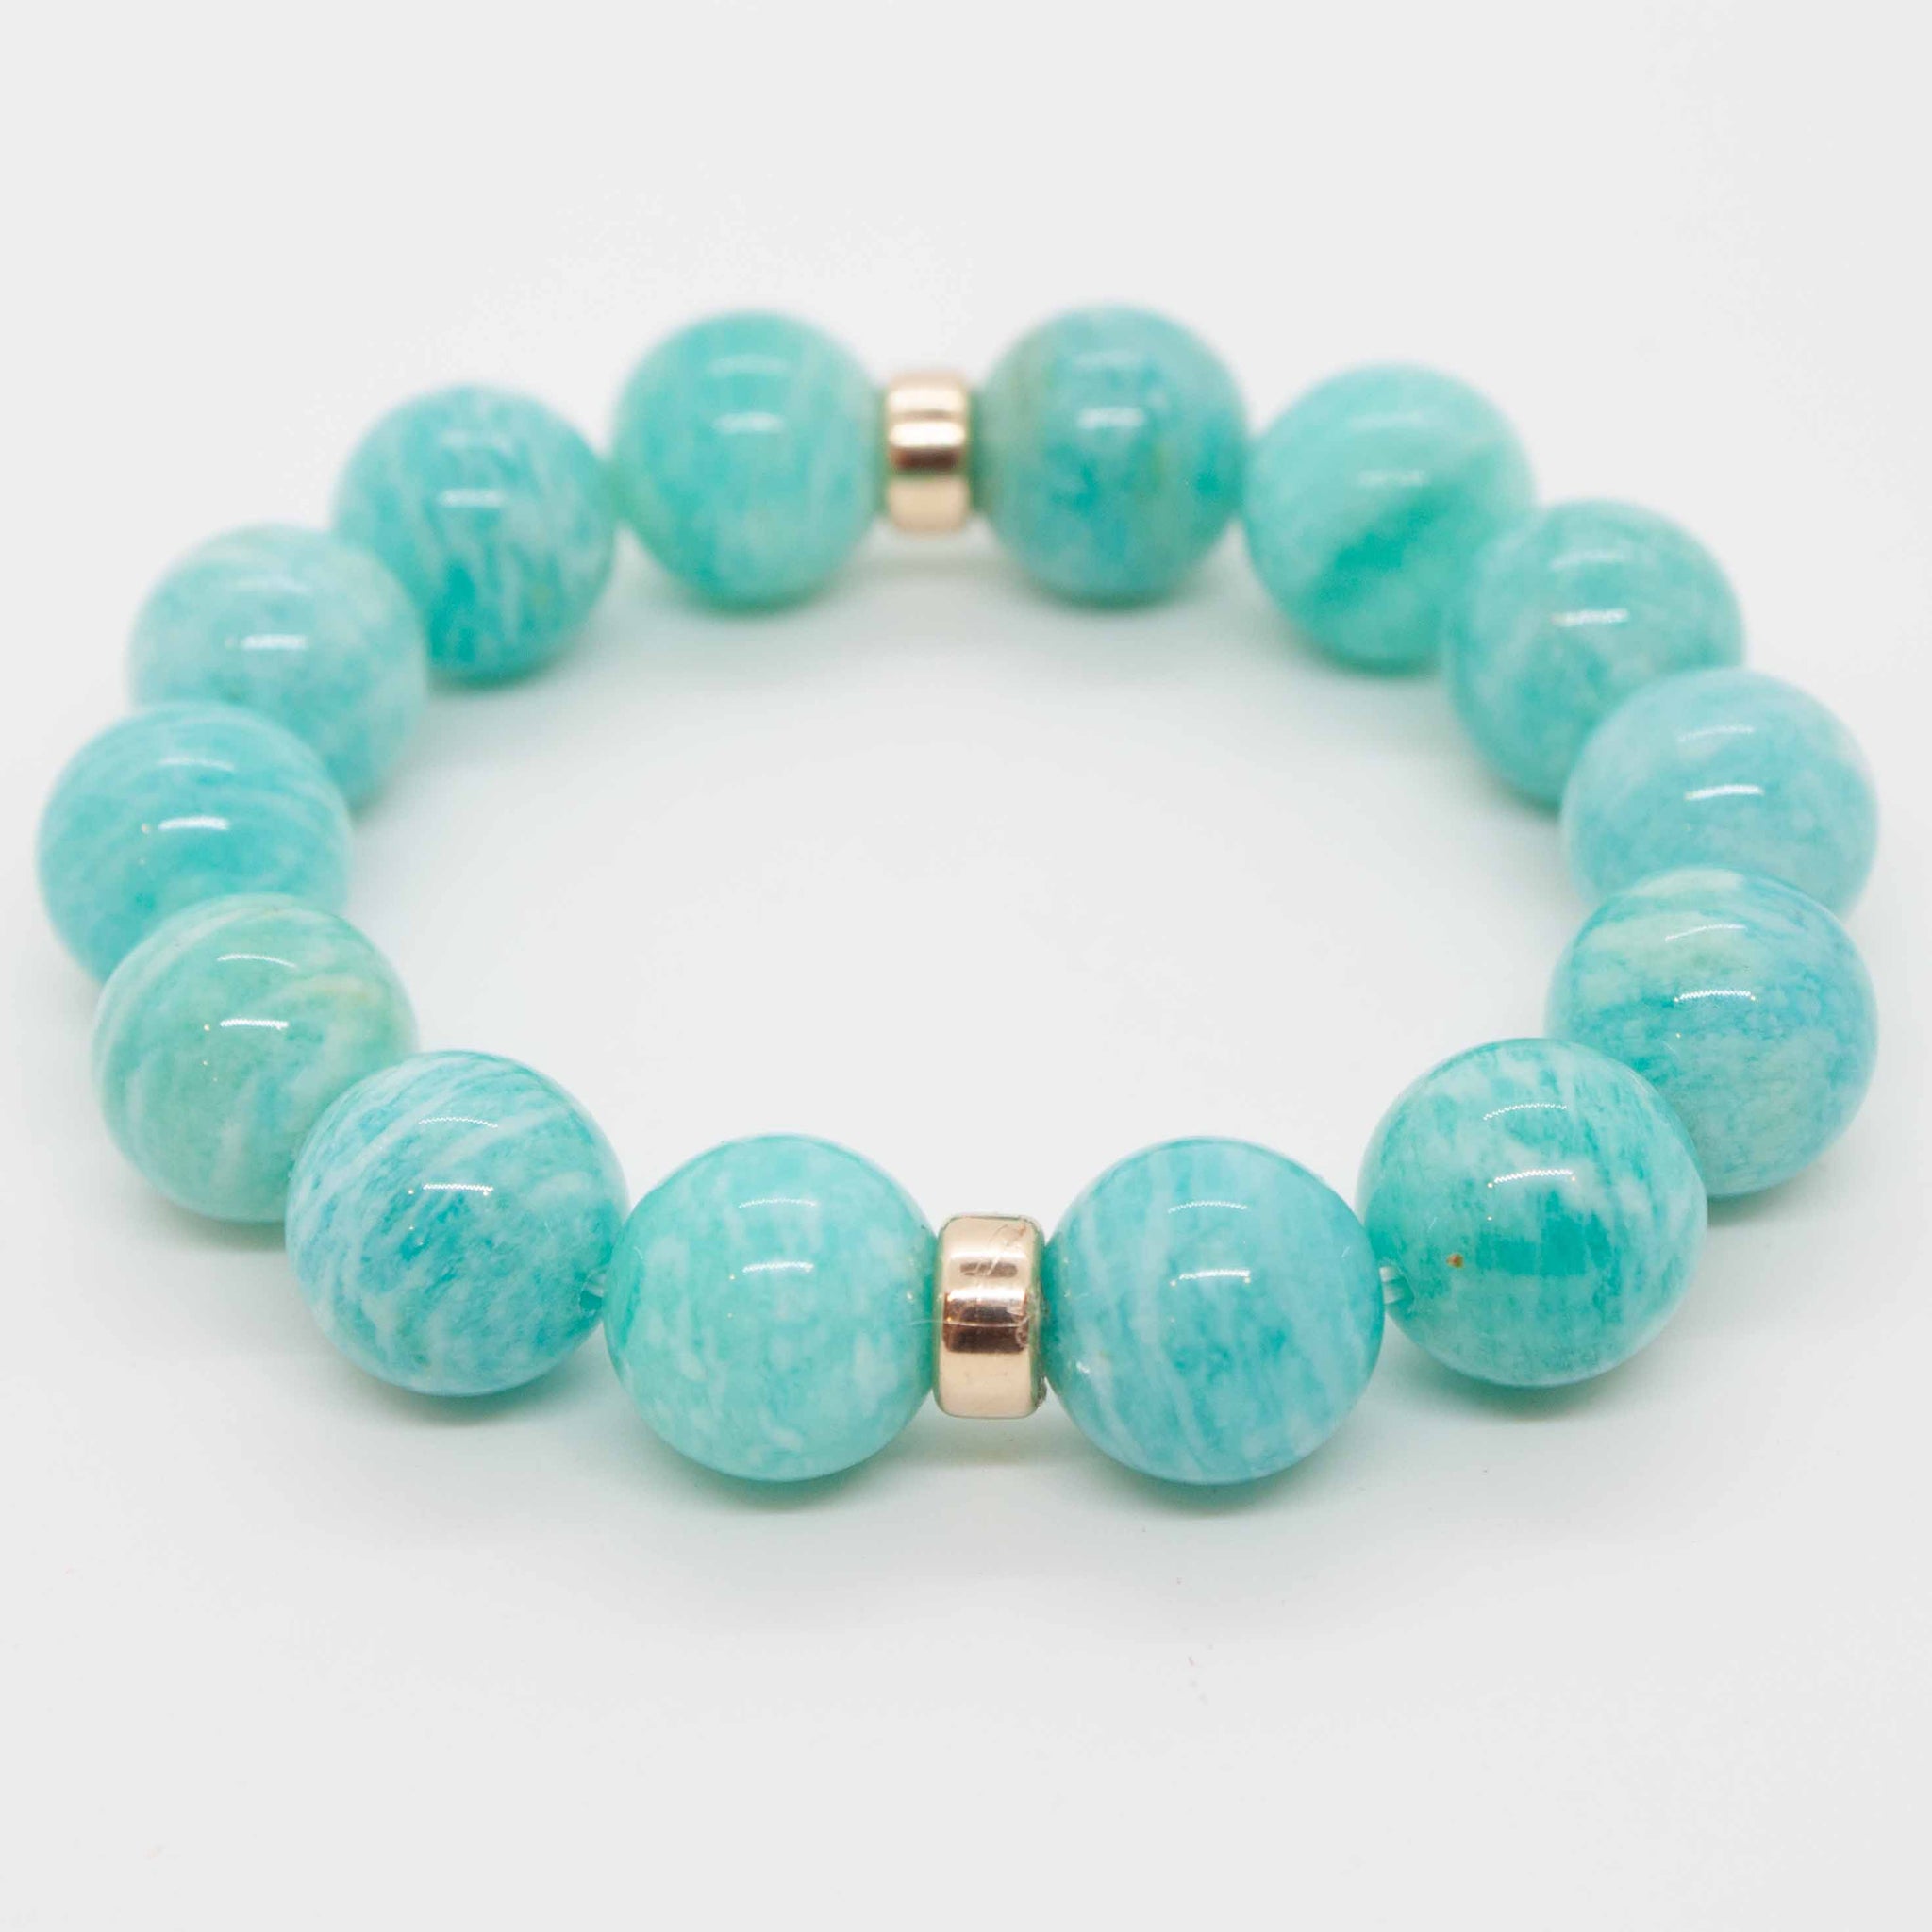 Our favourite colour combo - gold and turquoise! Treat yourself to some seriously beautiful and memorable arm candy this summer! 7" amazonite bracelet and 14kt gold filled beads double strung with silk elastic handmade in Toronto kp jewelry co. 